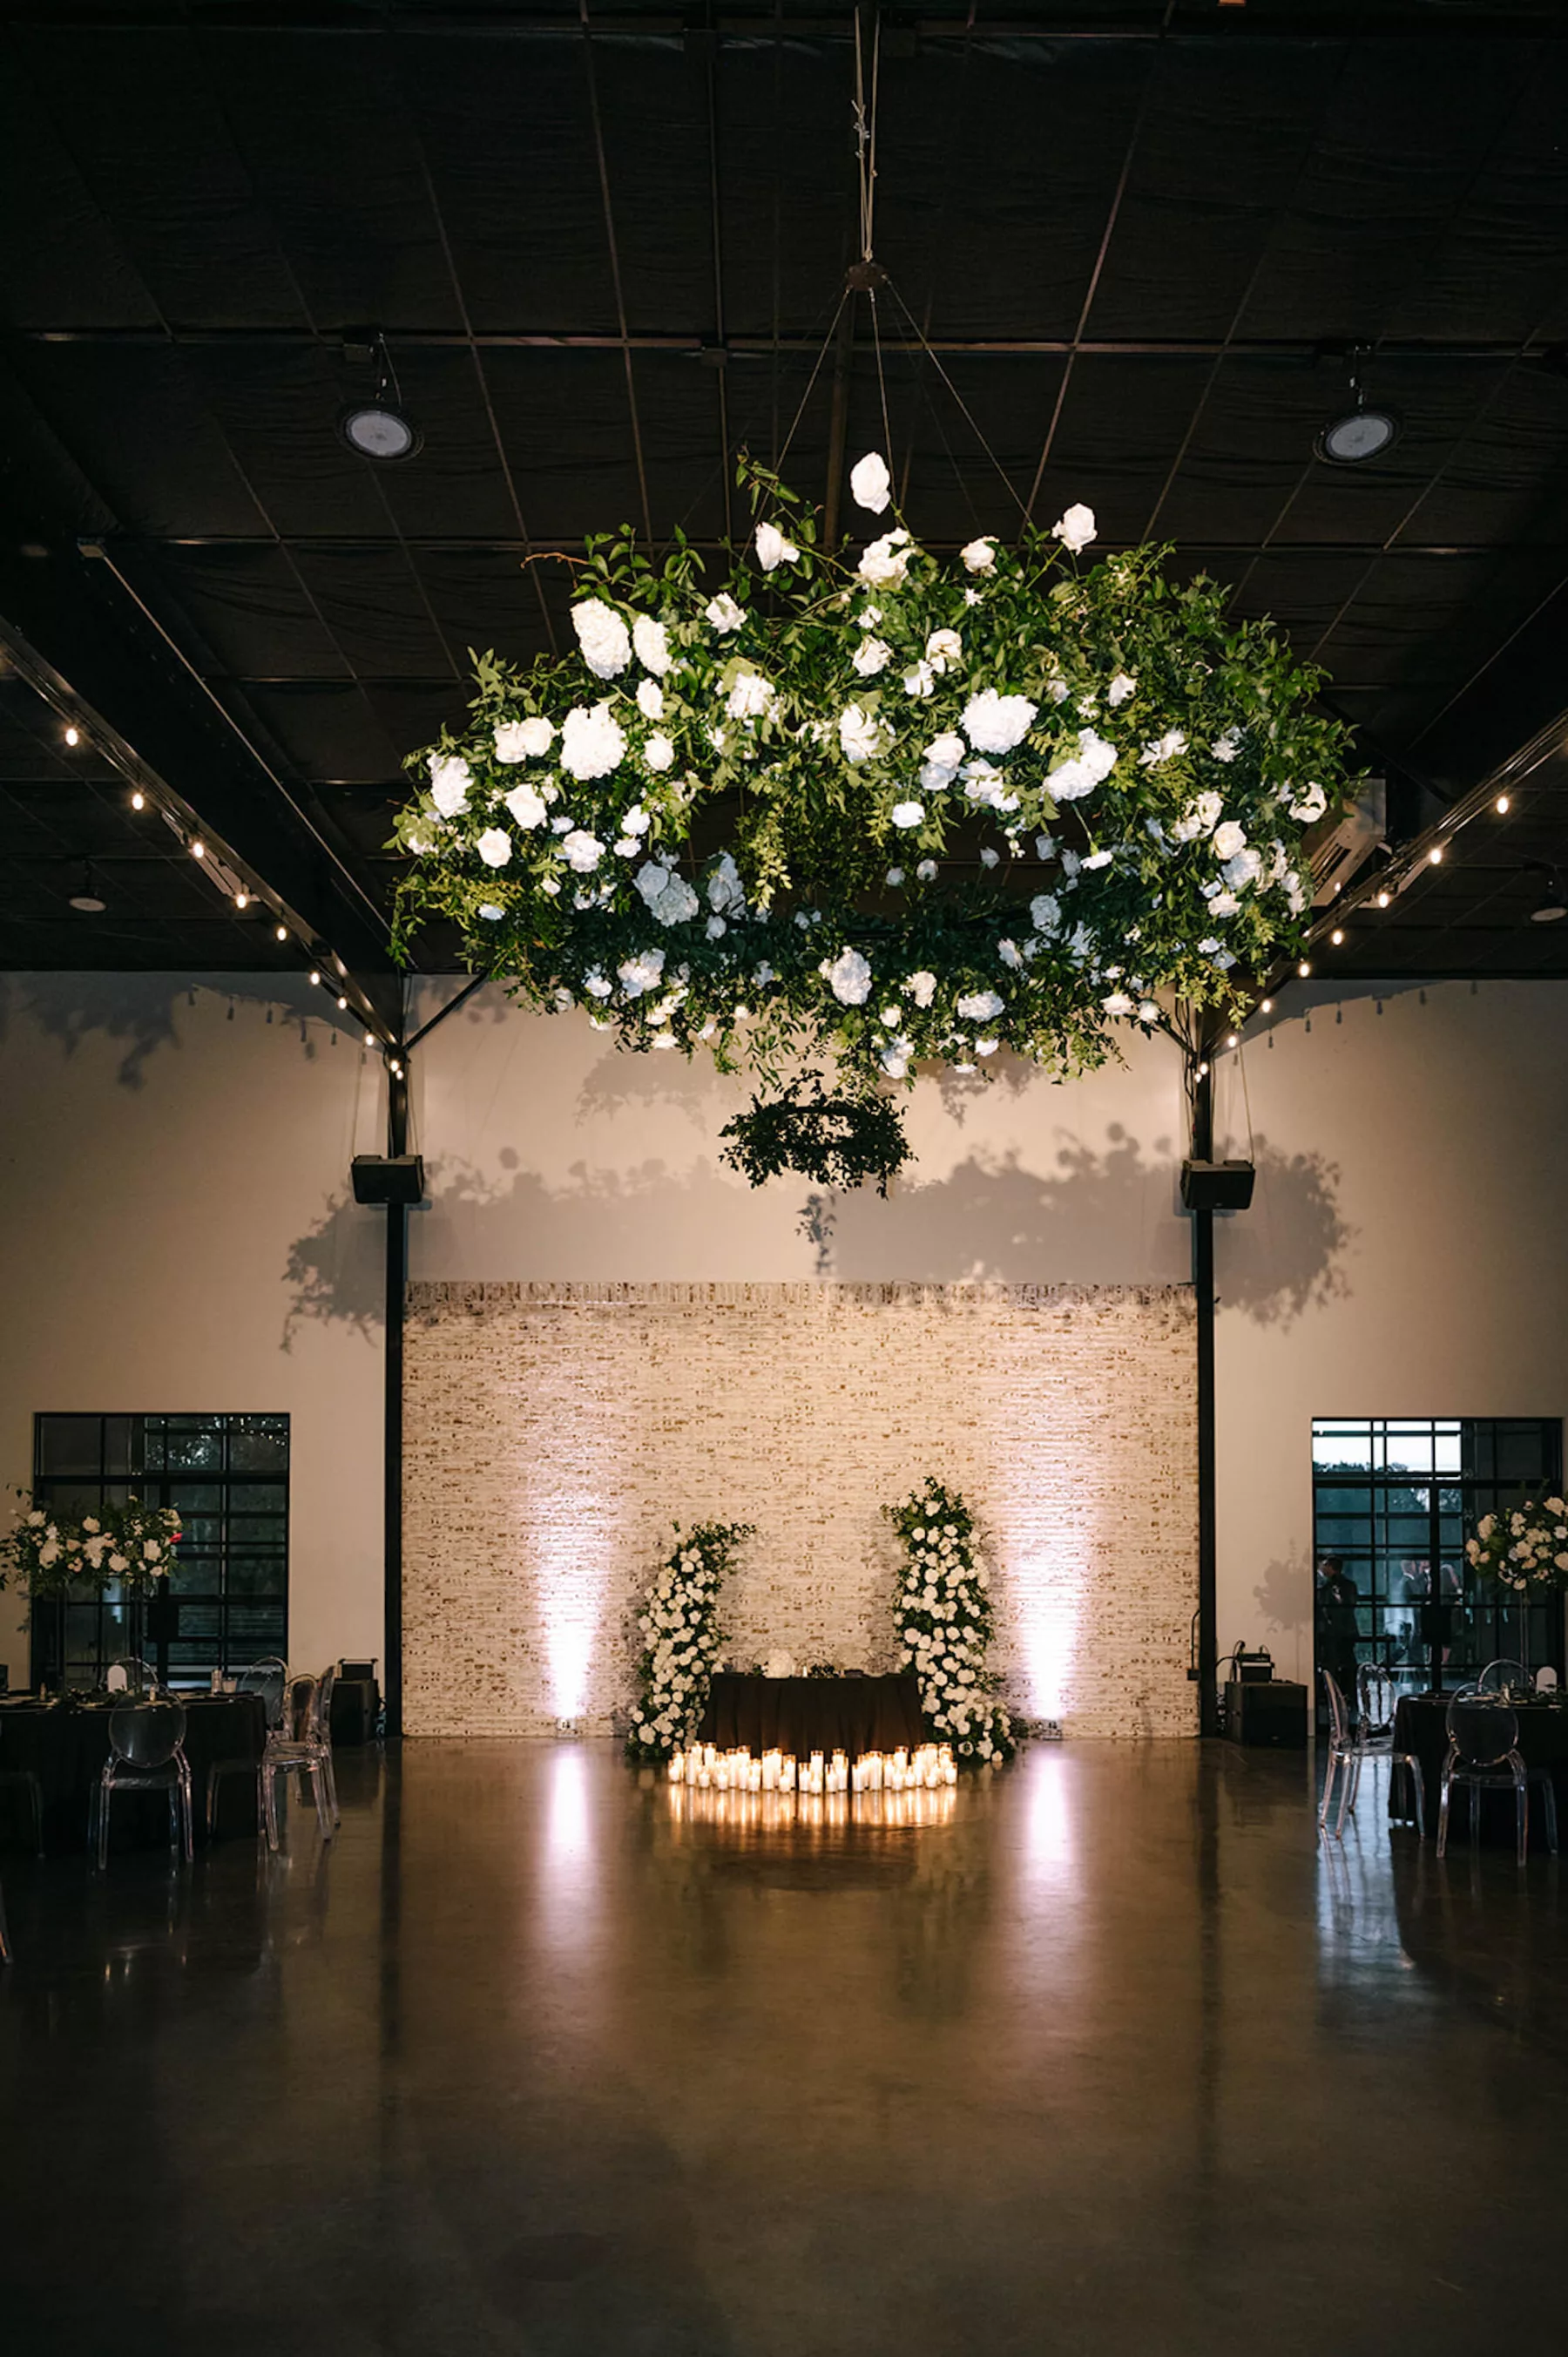 Moody Modern Black and White Wedding Reception Sweetheart Table Candlelight Decor Inspiration | White Rose, Hydrangeas, and Greenery Floral Chandelier Ideas | Tampa Bay Florist Bloom Shakalaka | Planner Kelci Leigh Events